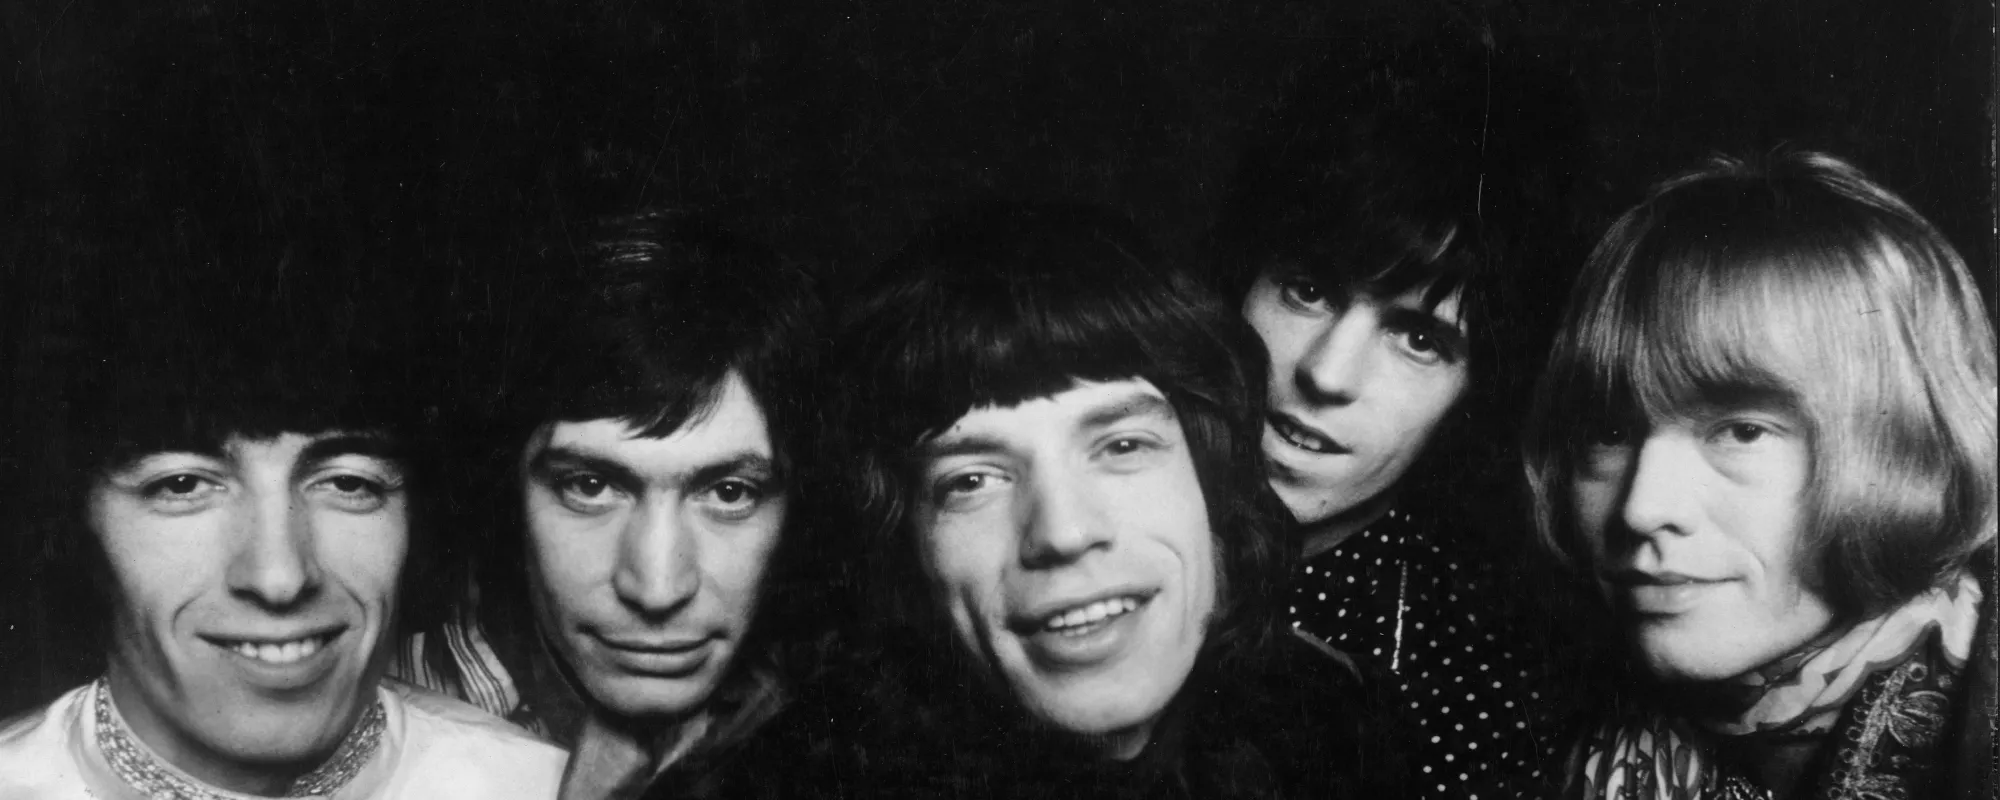 The Story Behind “As Tears Go By” by The Rolling Stones and the Birth of a Legendary Songwriting Team